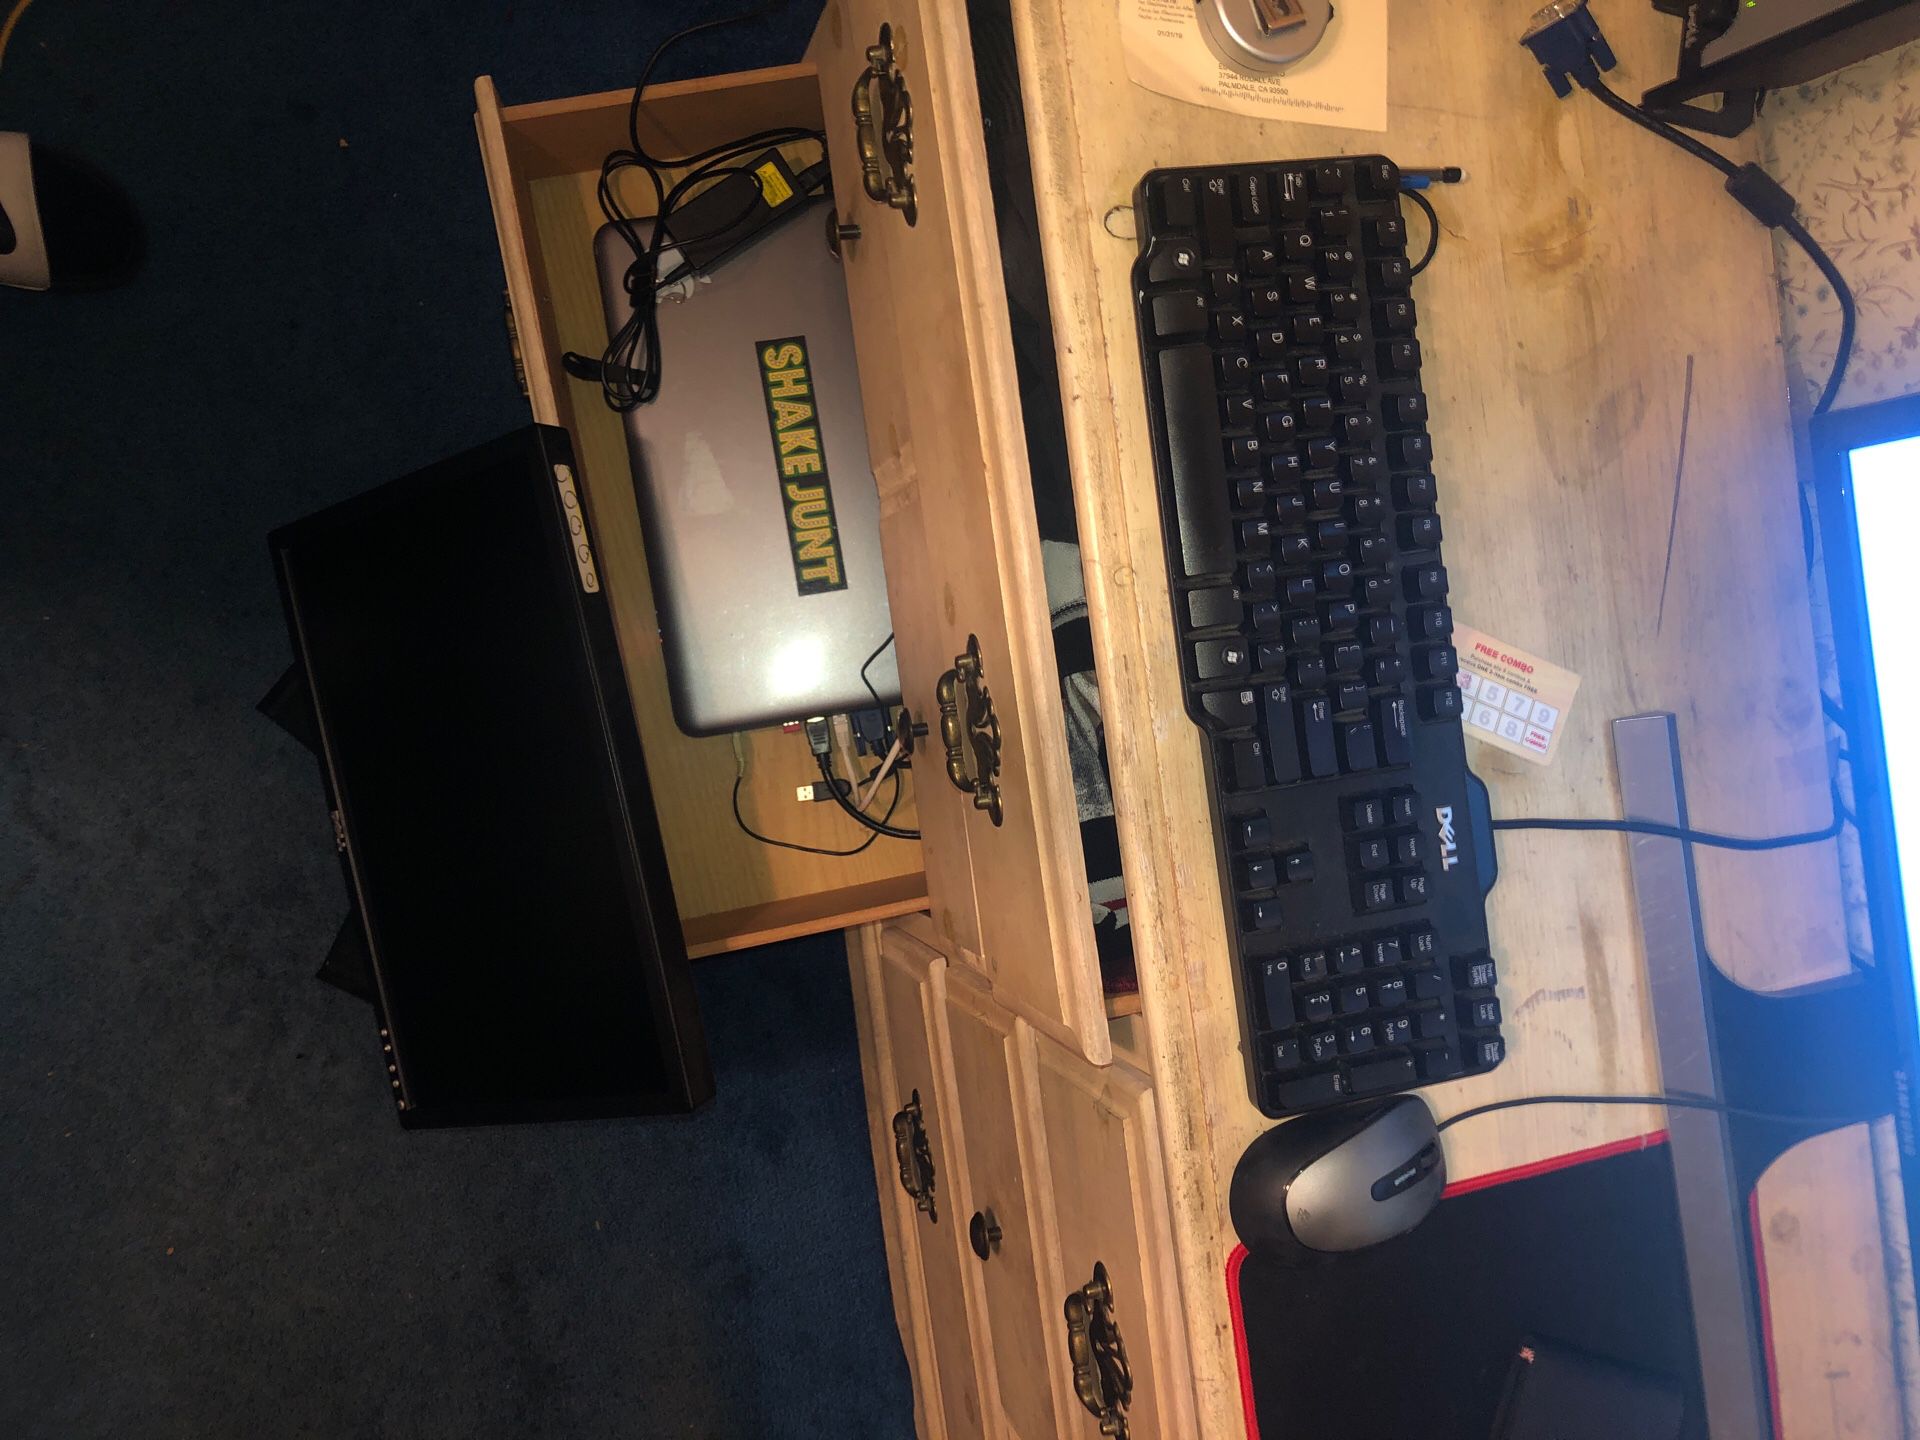 LAPTOP WITH MONITOR, KEYBOARD, AND MOUSE FULL SET TO USE LIKE COMPUTER